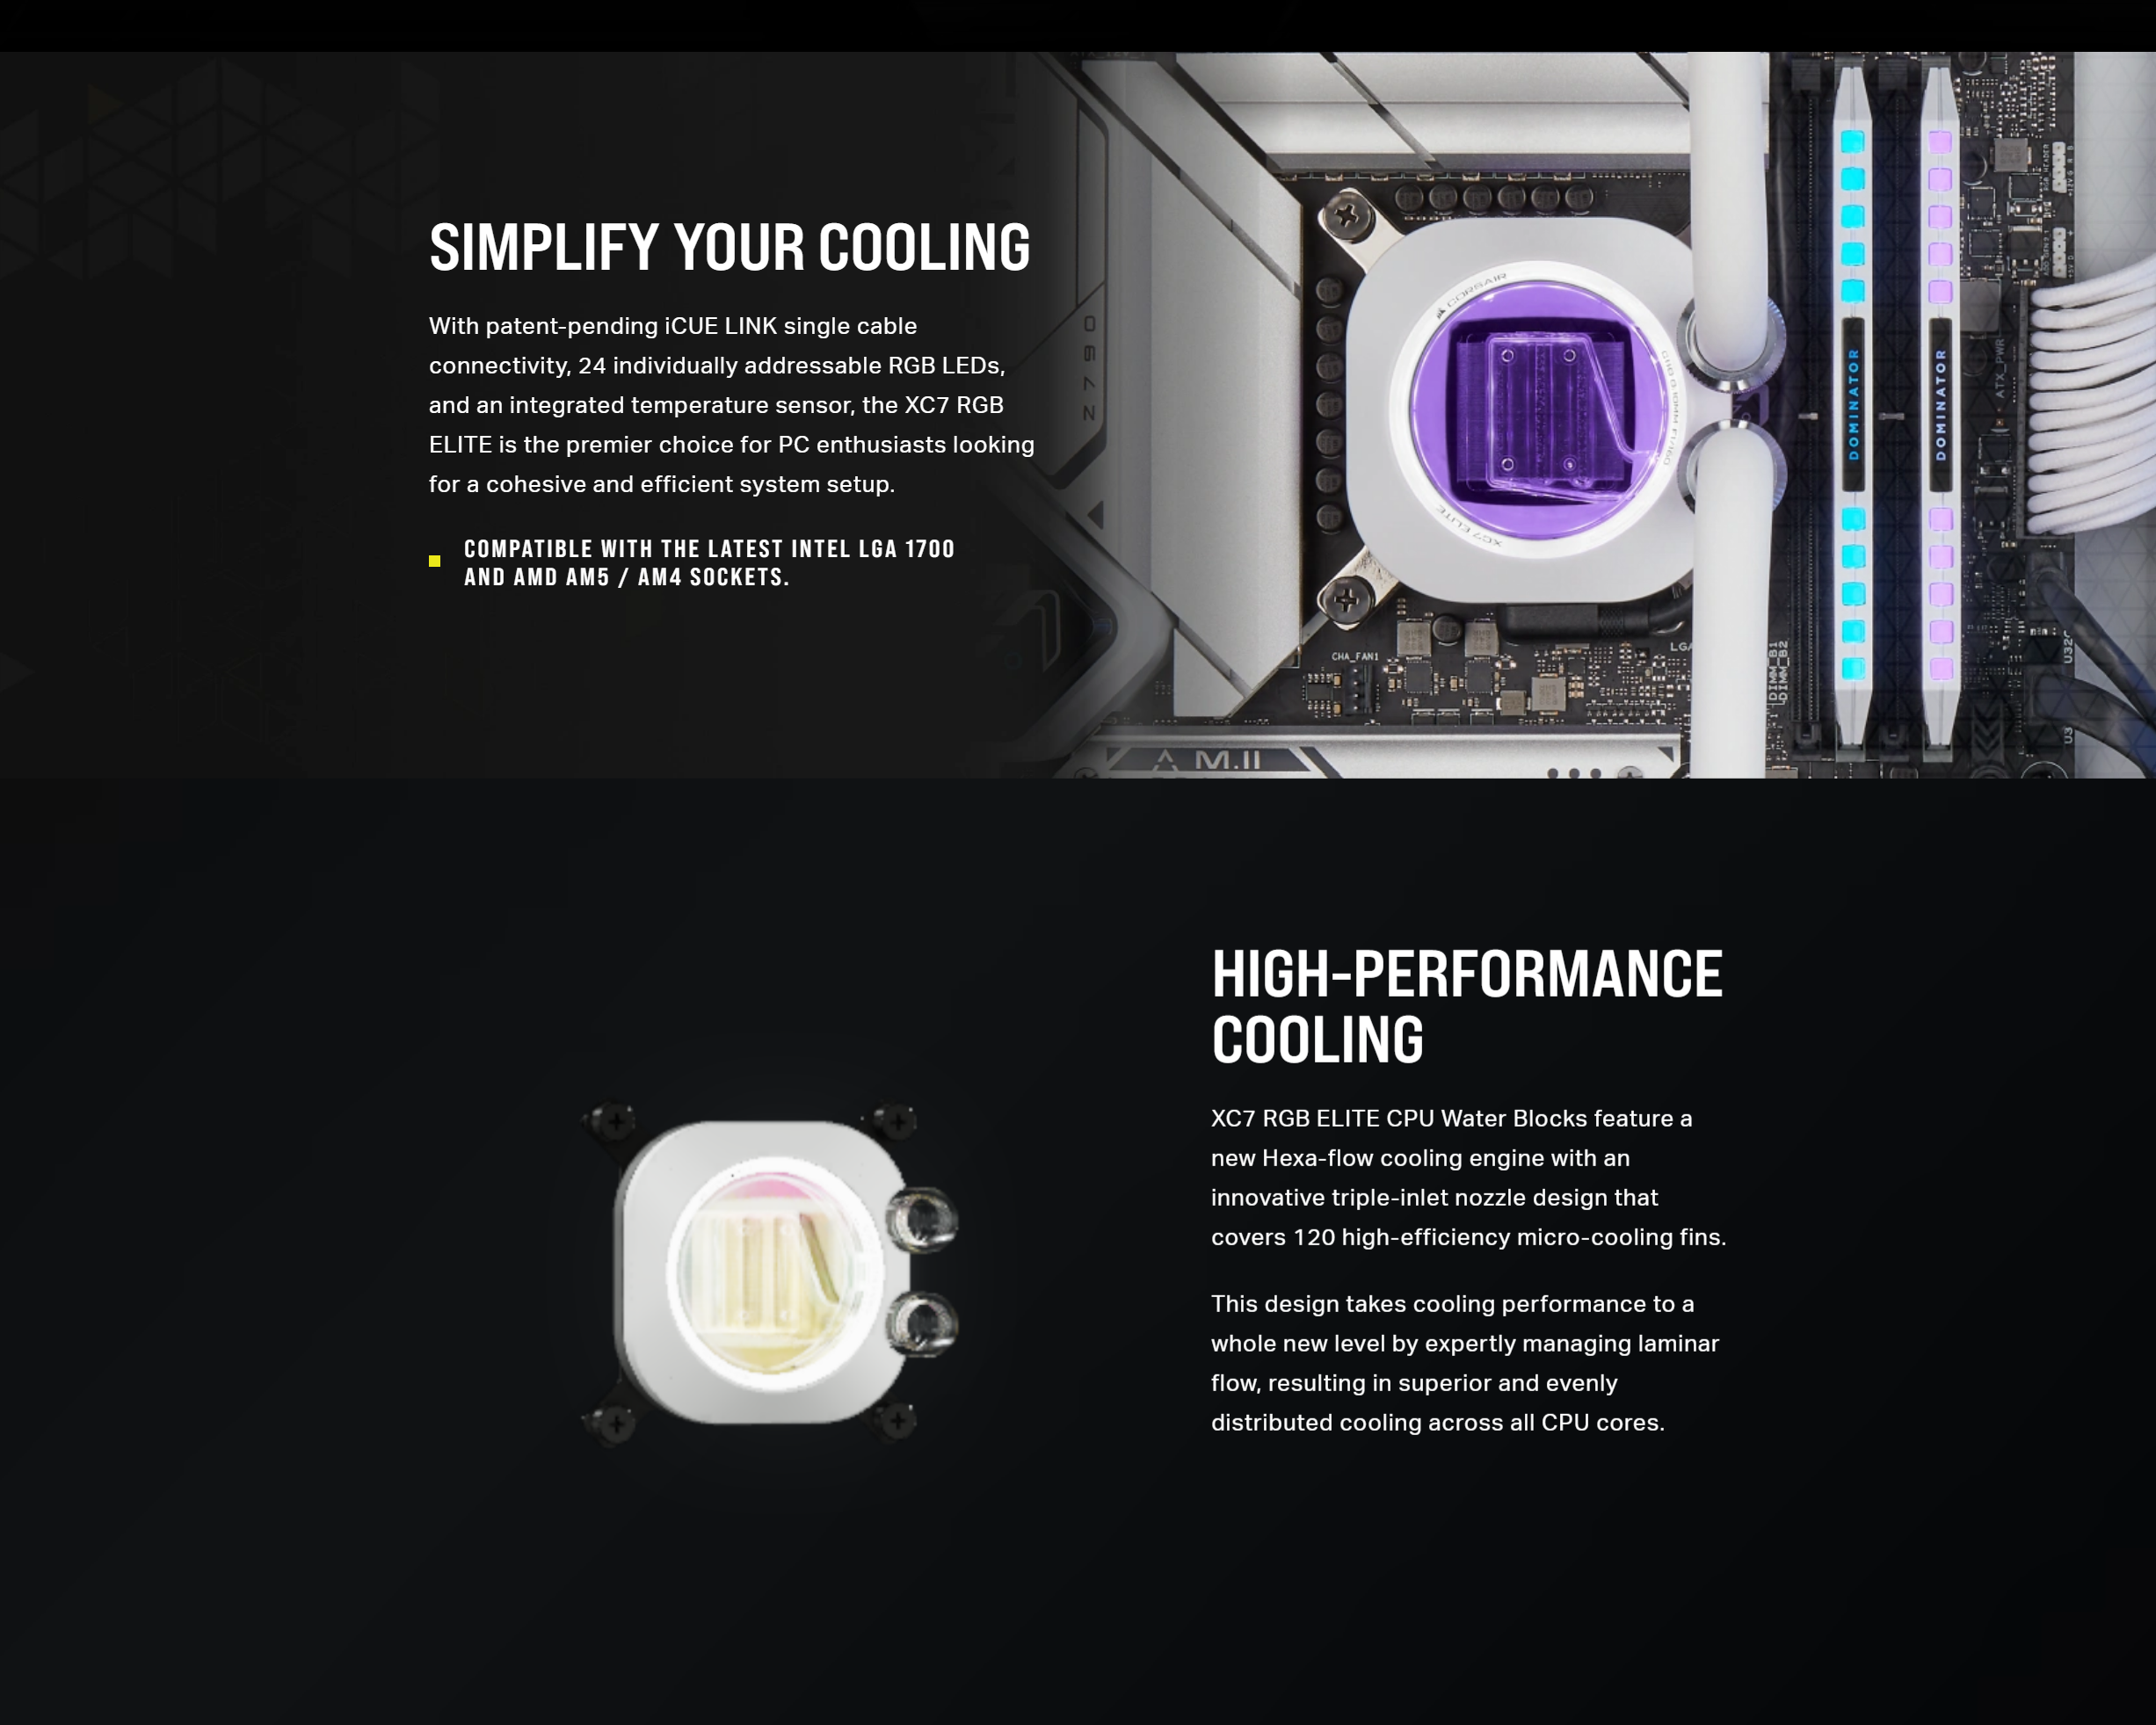 A large marketing image providing additional information about the product Corsair iCUE LINK XC7 RGB Elite CPU Water Block - White - Additional alt info not provided